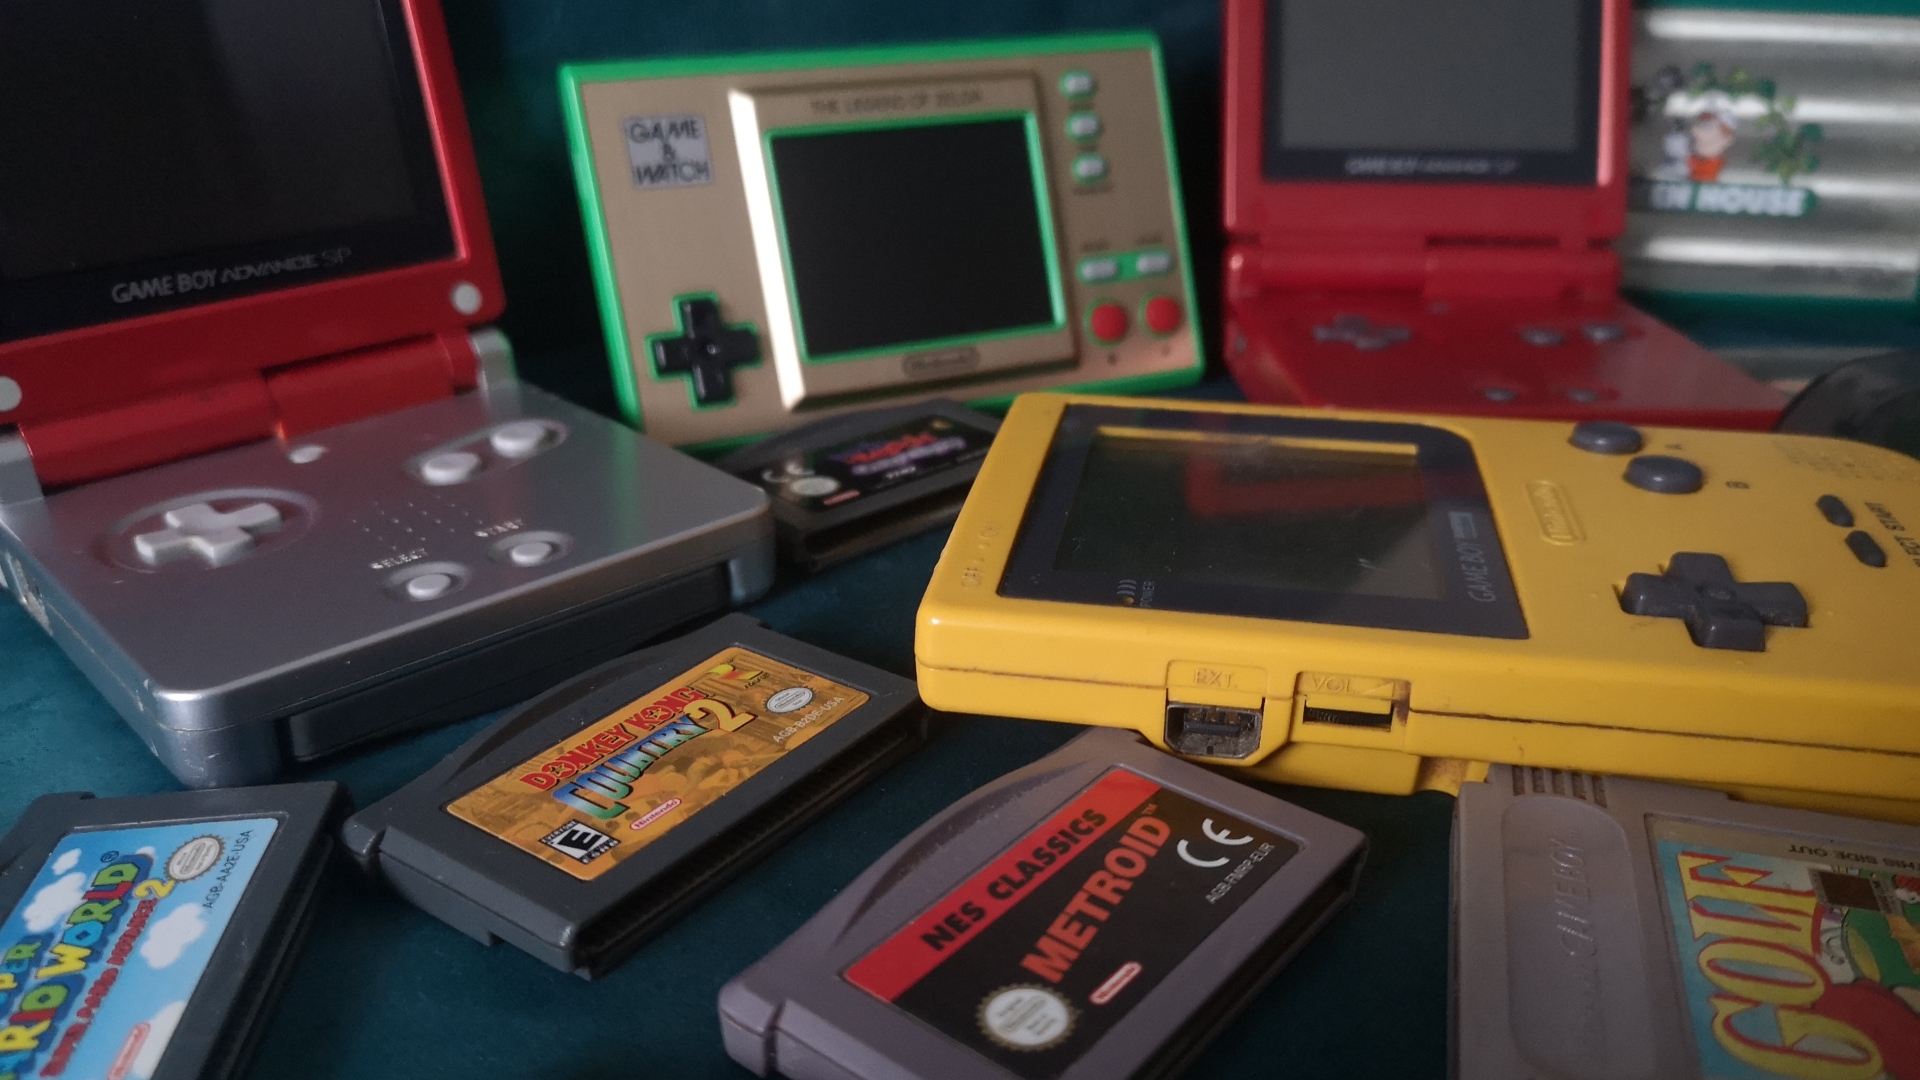 New retro Pocket handheld plays games of every Game Boy – and more